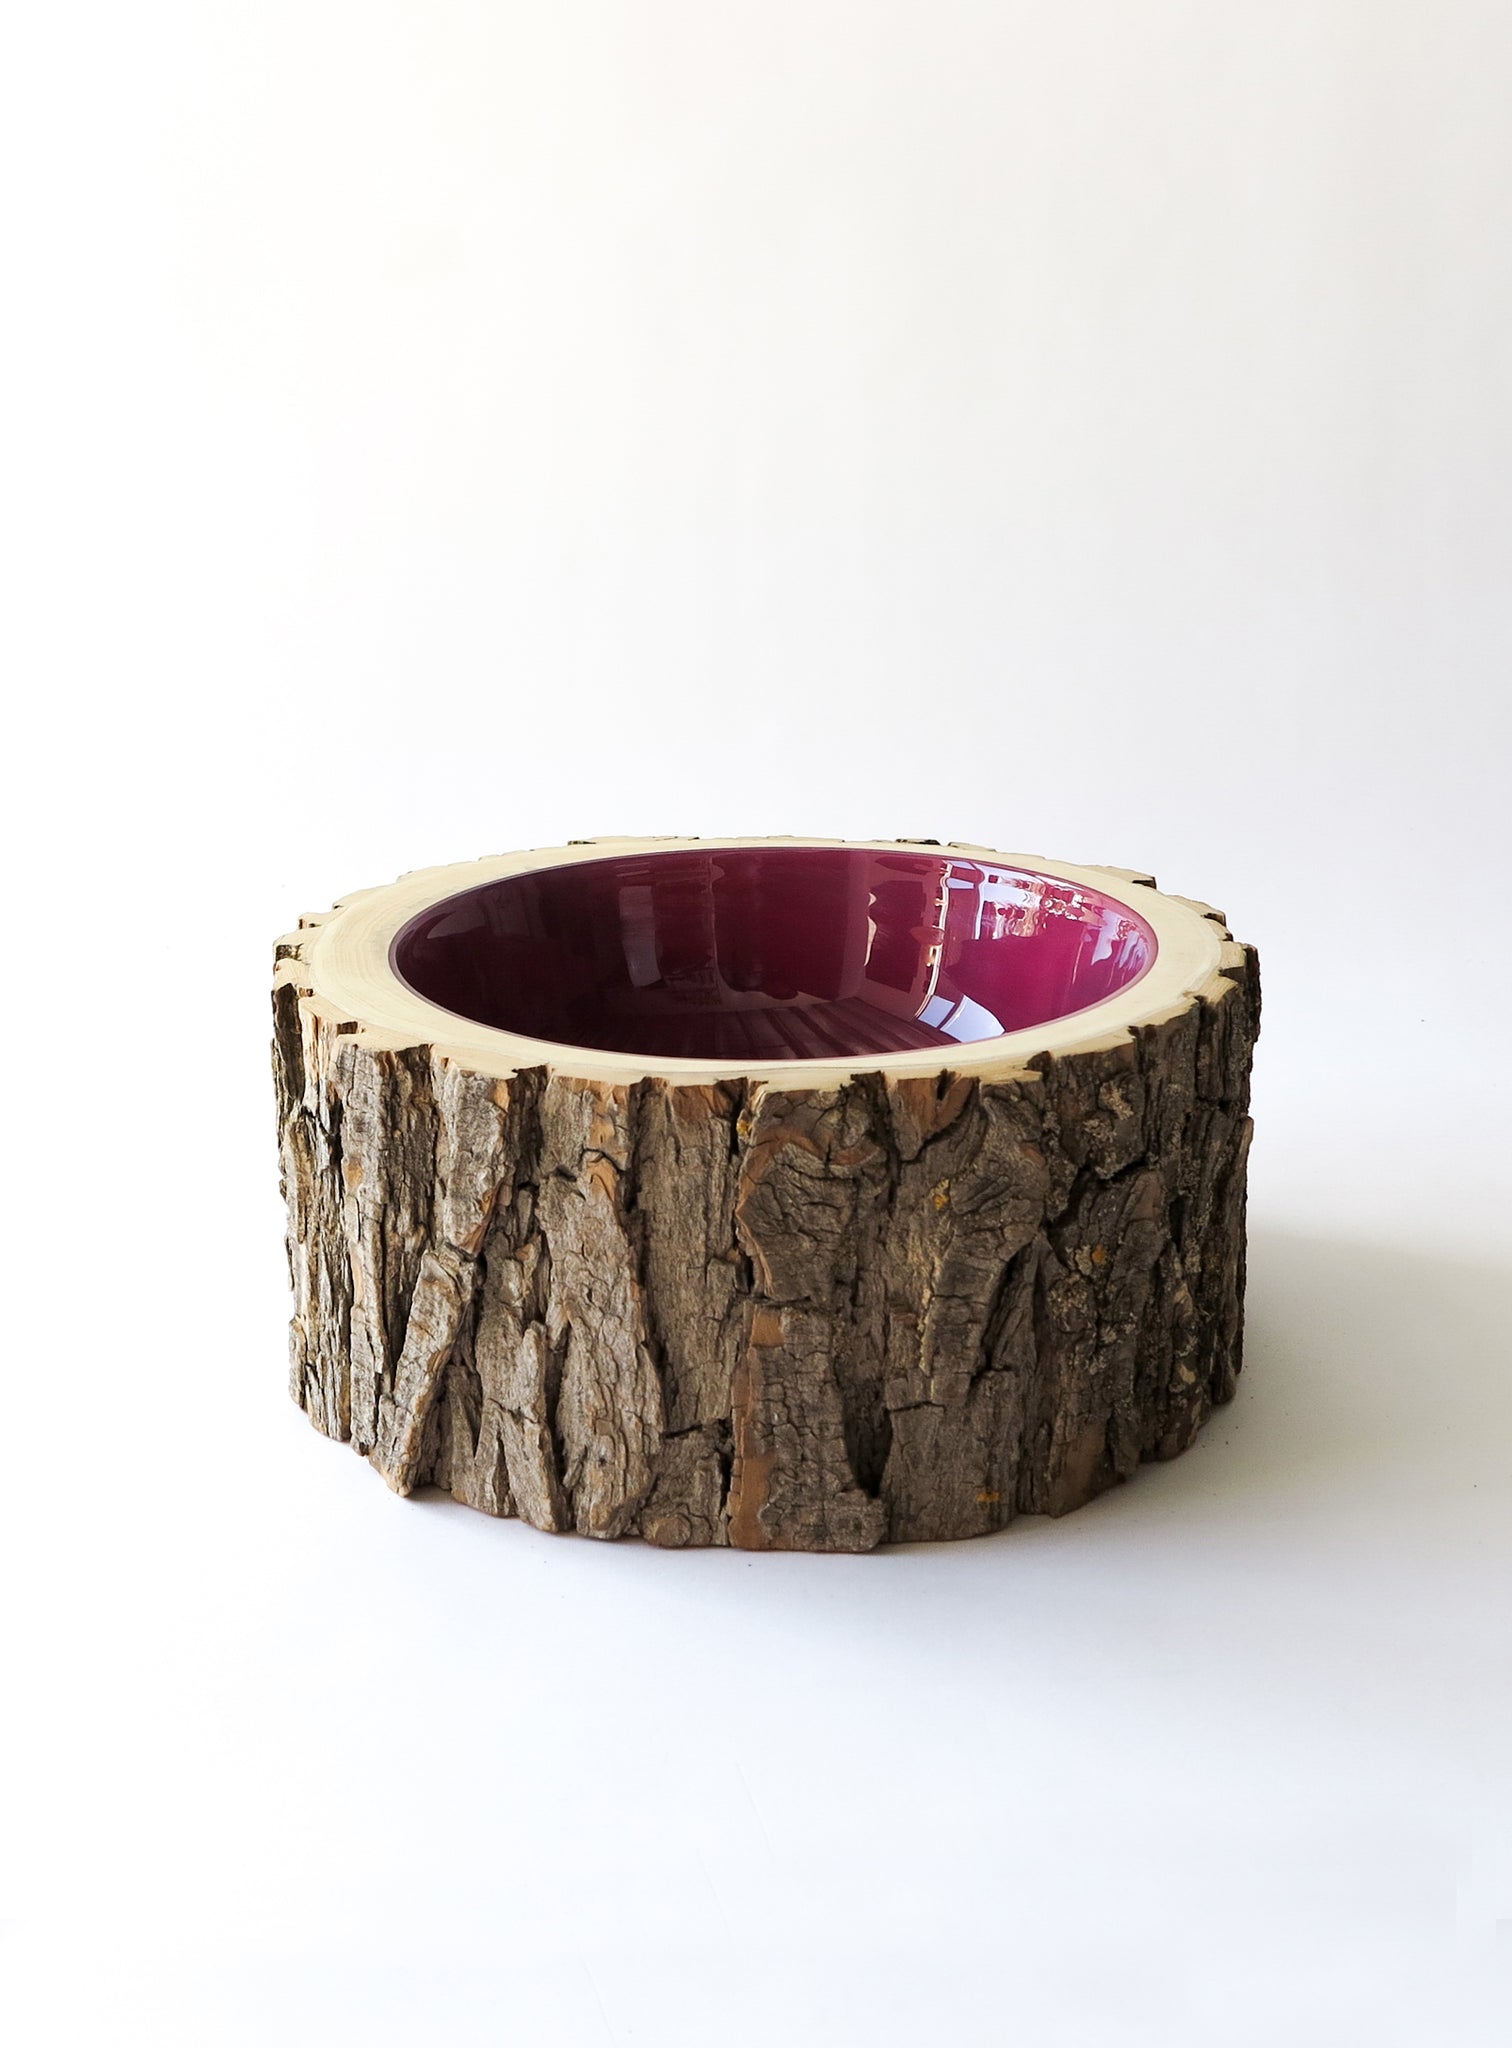 3/4 front view of Size 10 Log Bowl - Large Wooden Bowl with rough Willow bark, glossy interior is a translucent deep magenta colour..